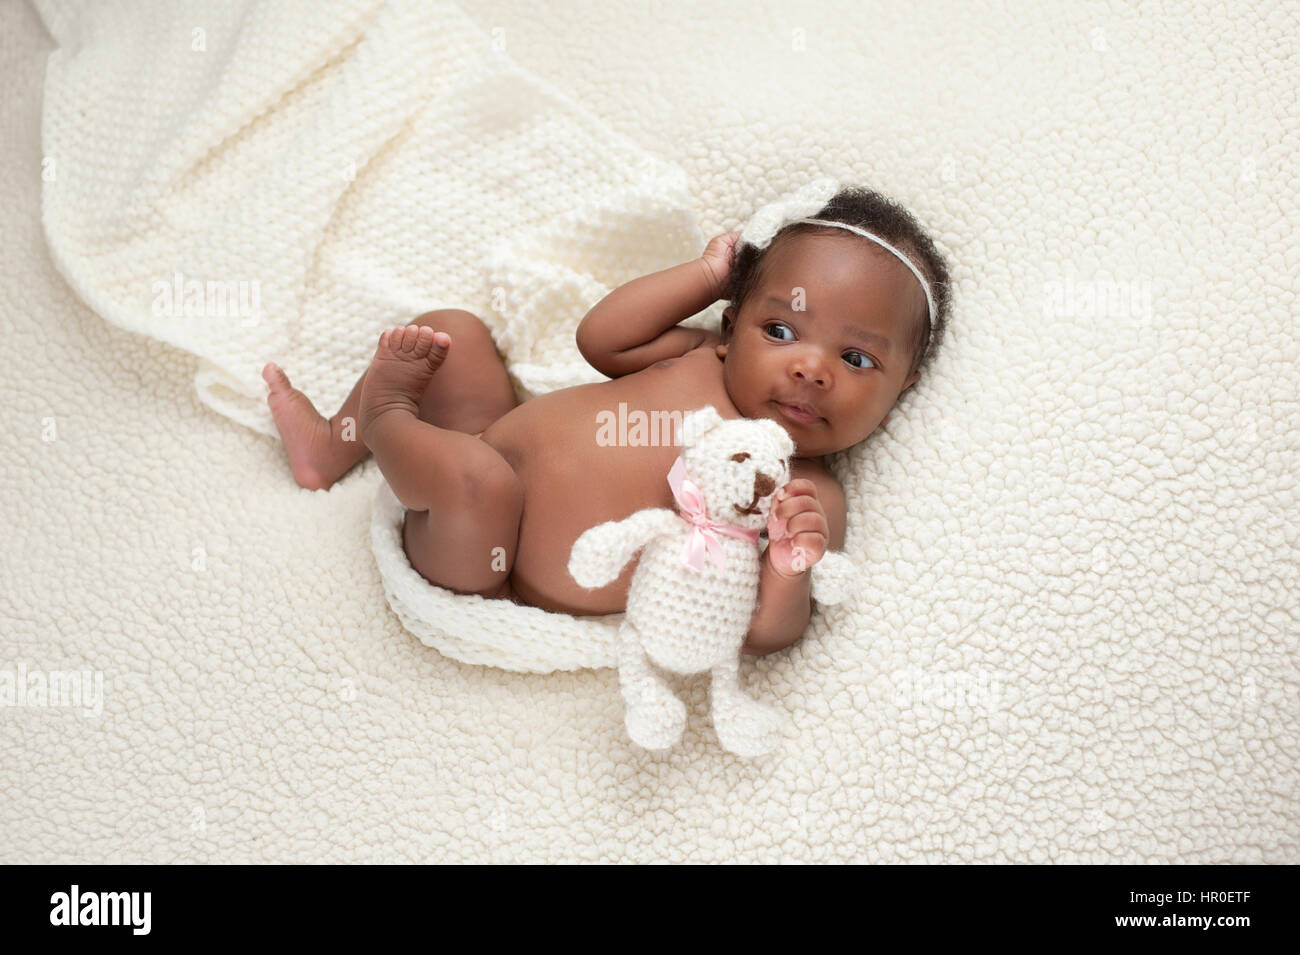 Portrait of a one month old, newborn baby girl. She is holding a stuffed bear and lying on a soft, cream colored, faux sheepskin blanket. Stock Photo